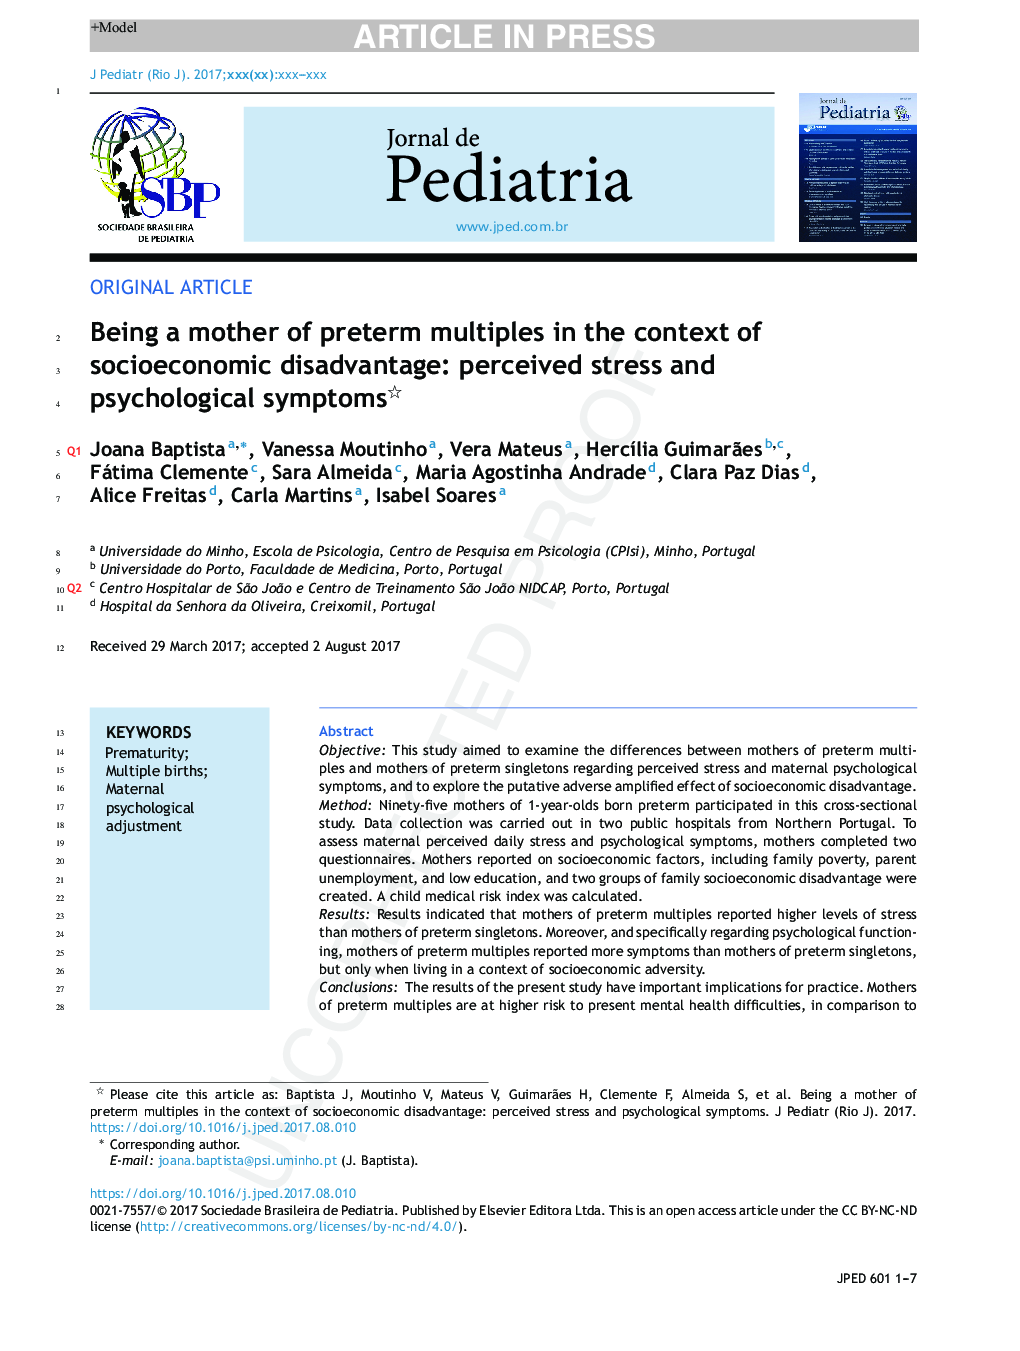 Being a mother of preterm multiples in the context of socioeconomic disadvantage: perceived stress and psychological symptoms